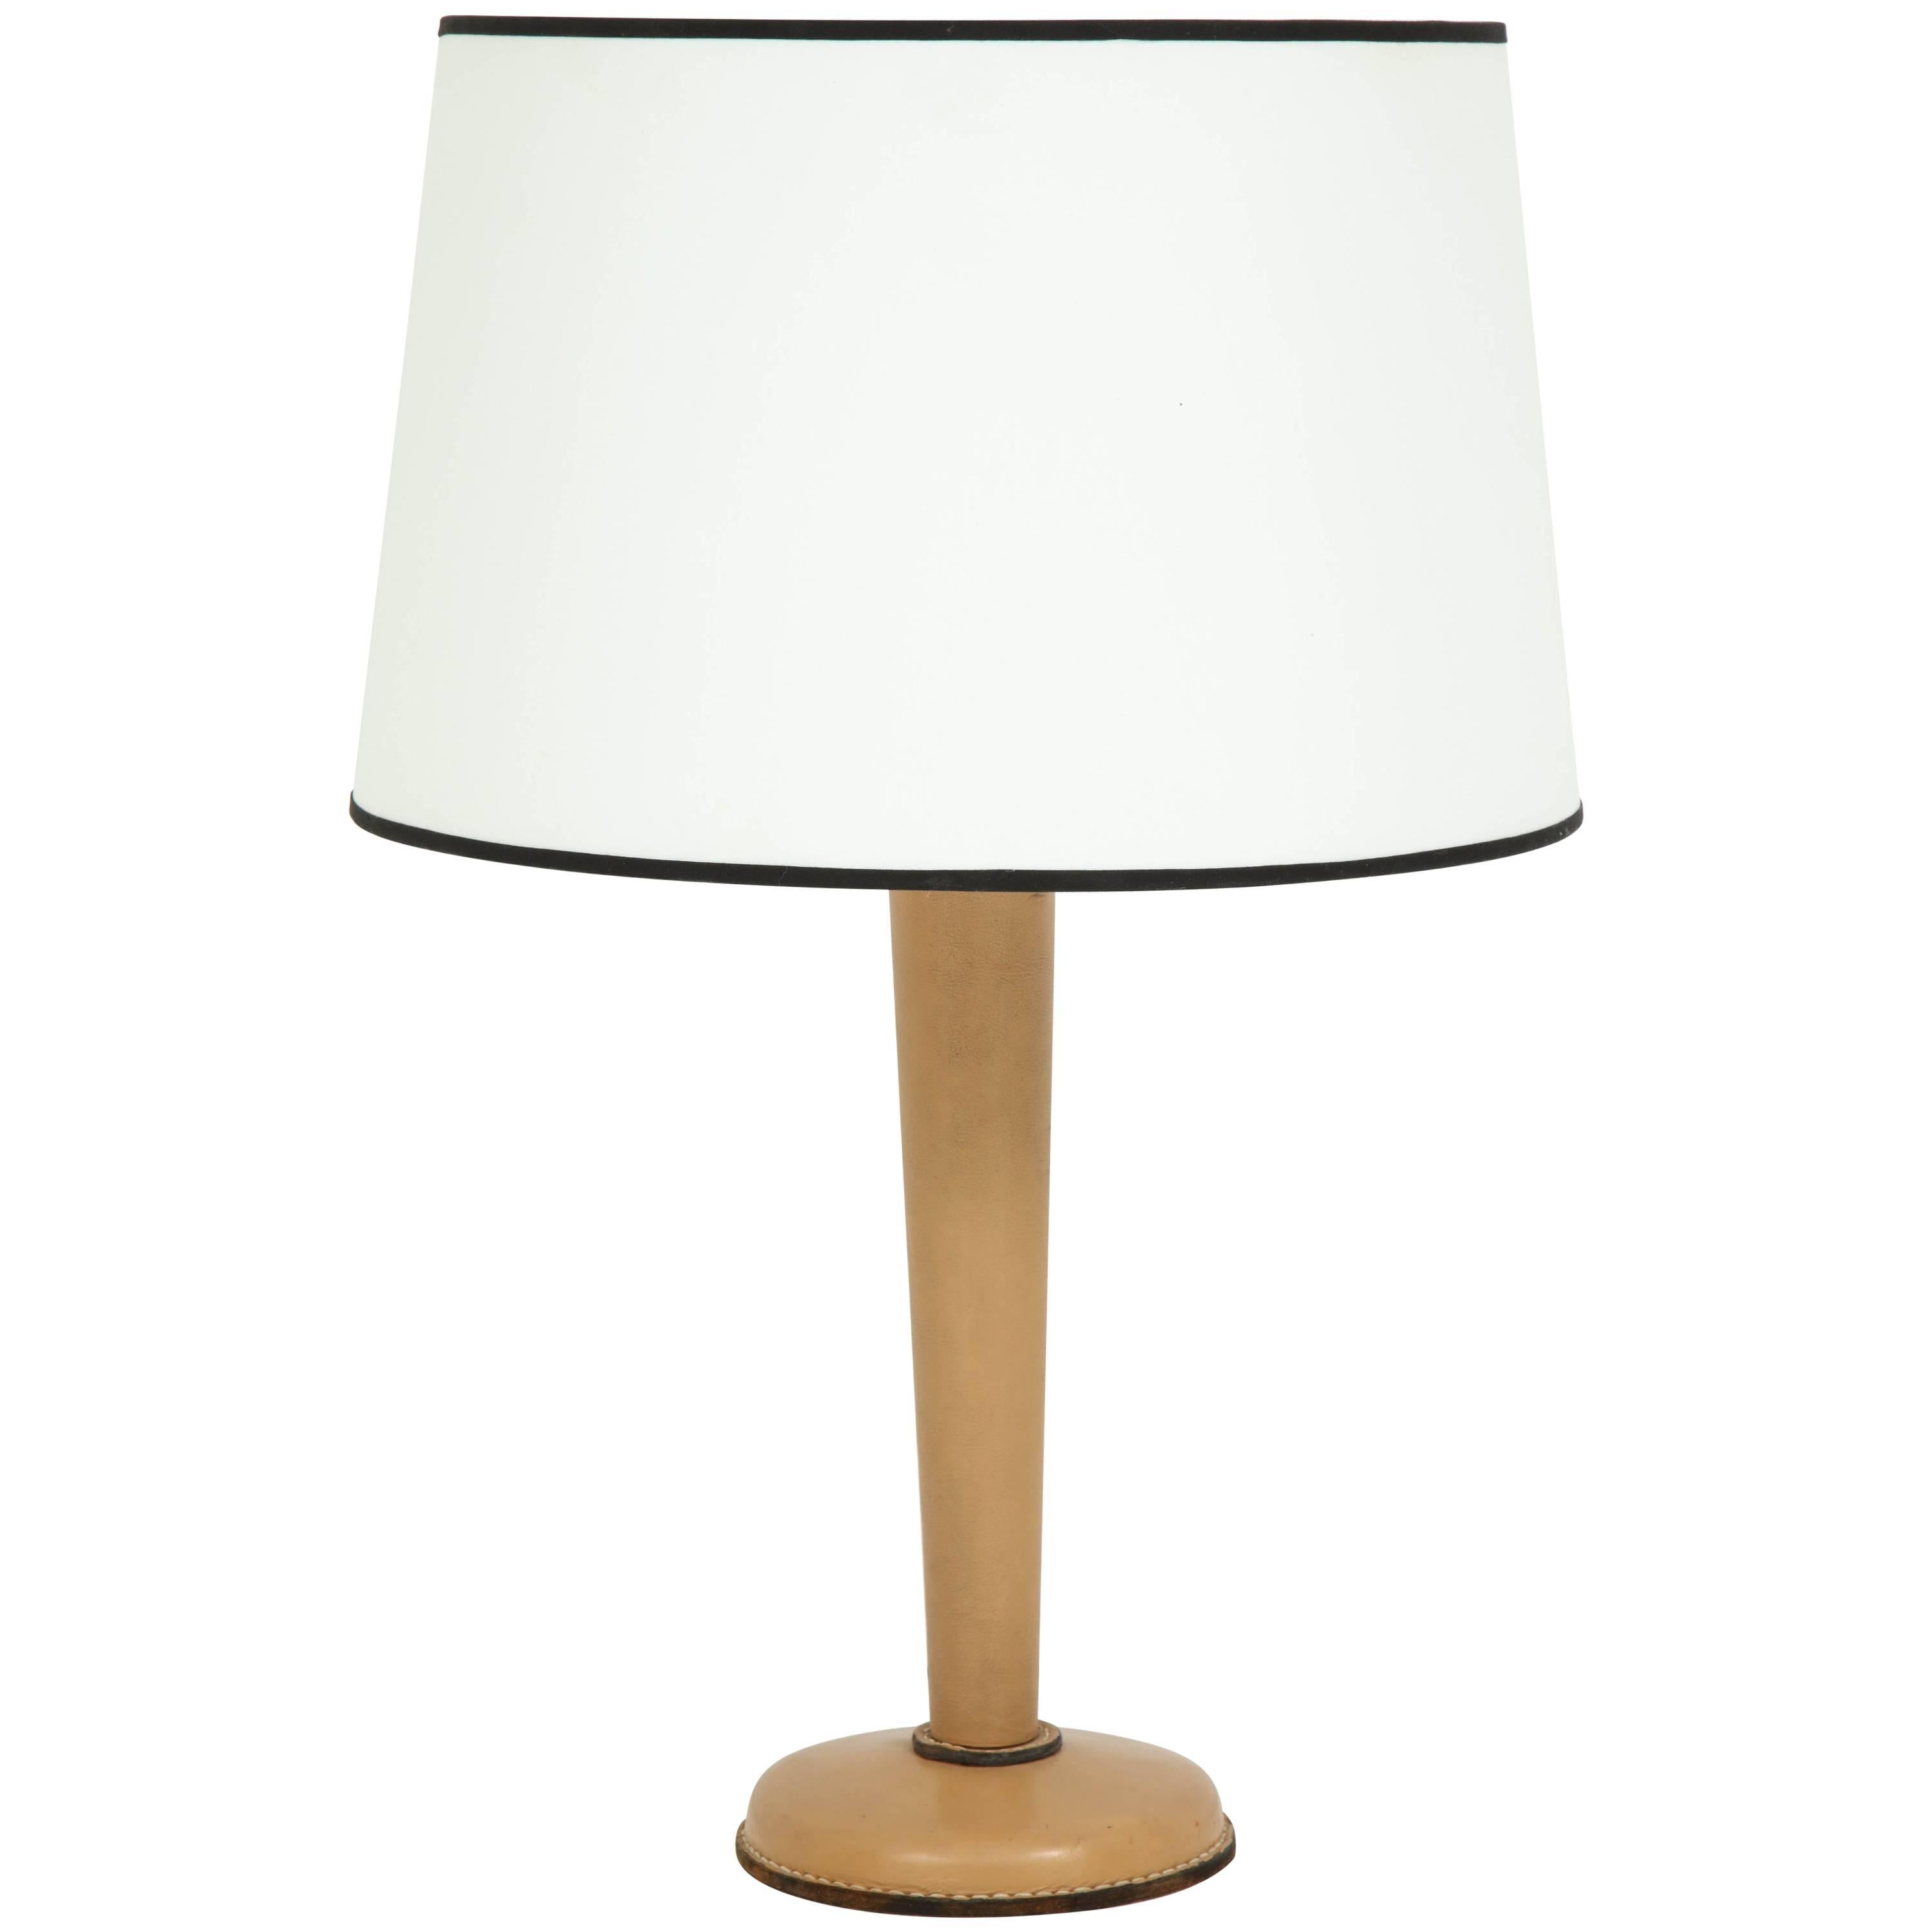 Large Jacques Adnet Table Lamp in Stitched Leather